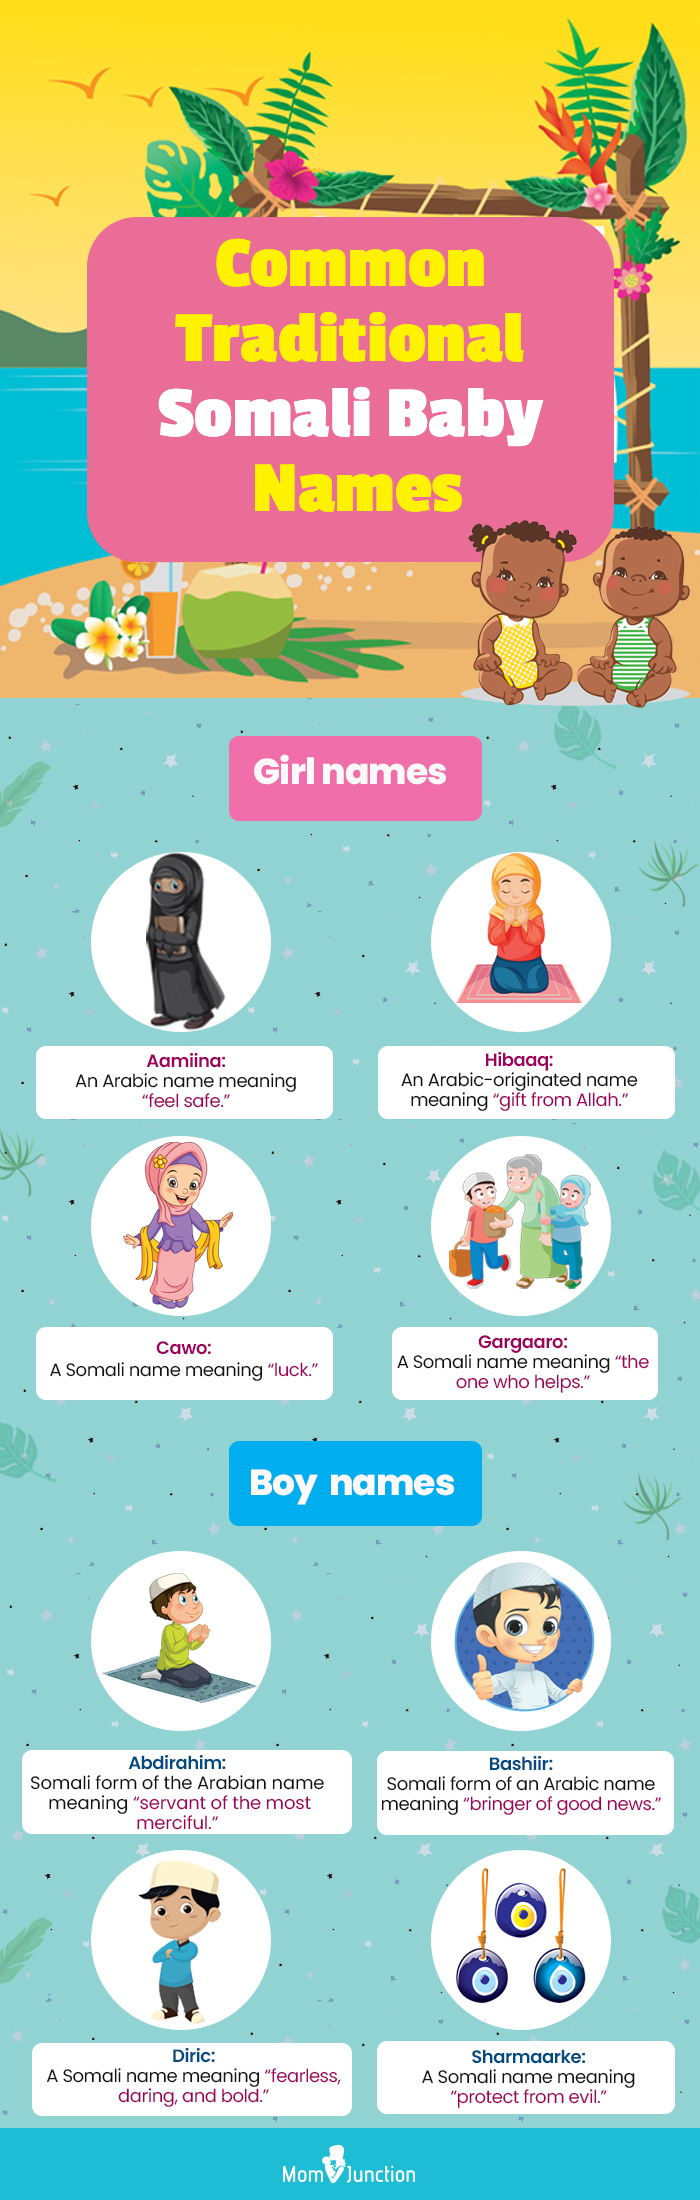 100 Somali Girl Names And Somali Boy Names For Your Little One! image